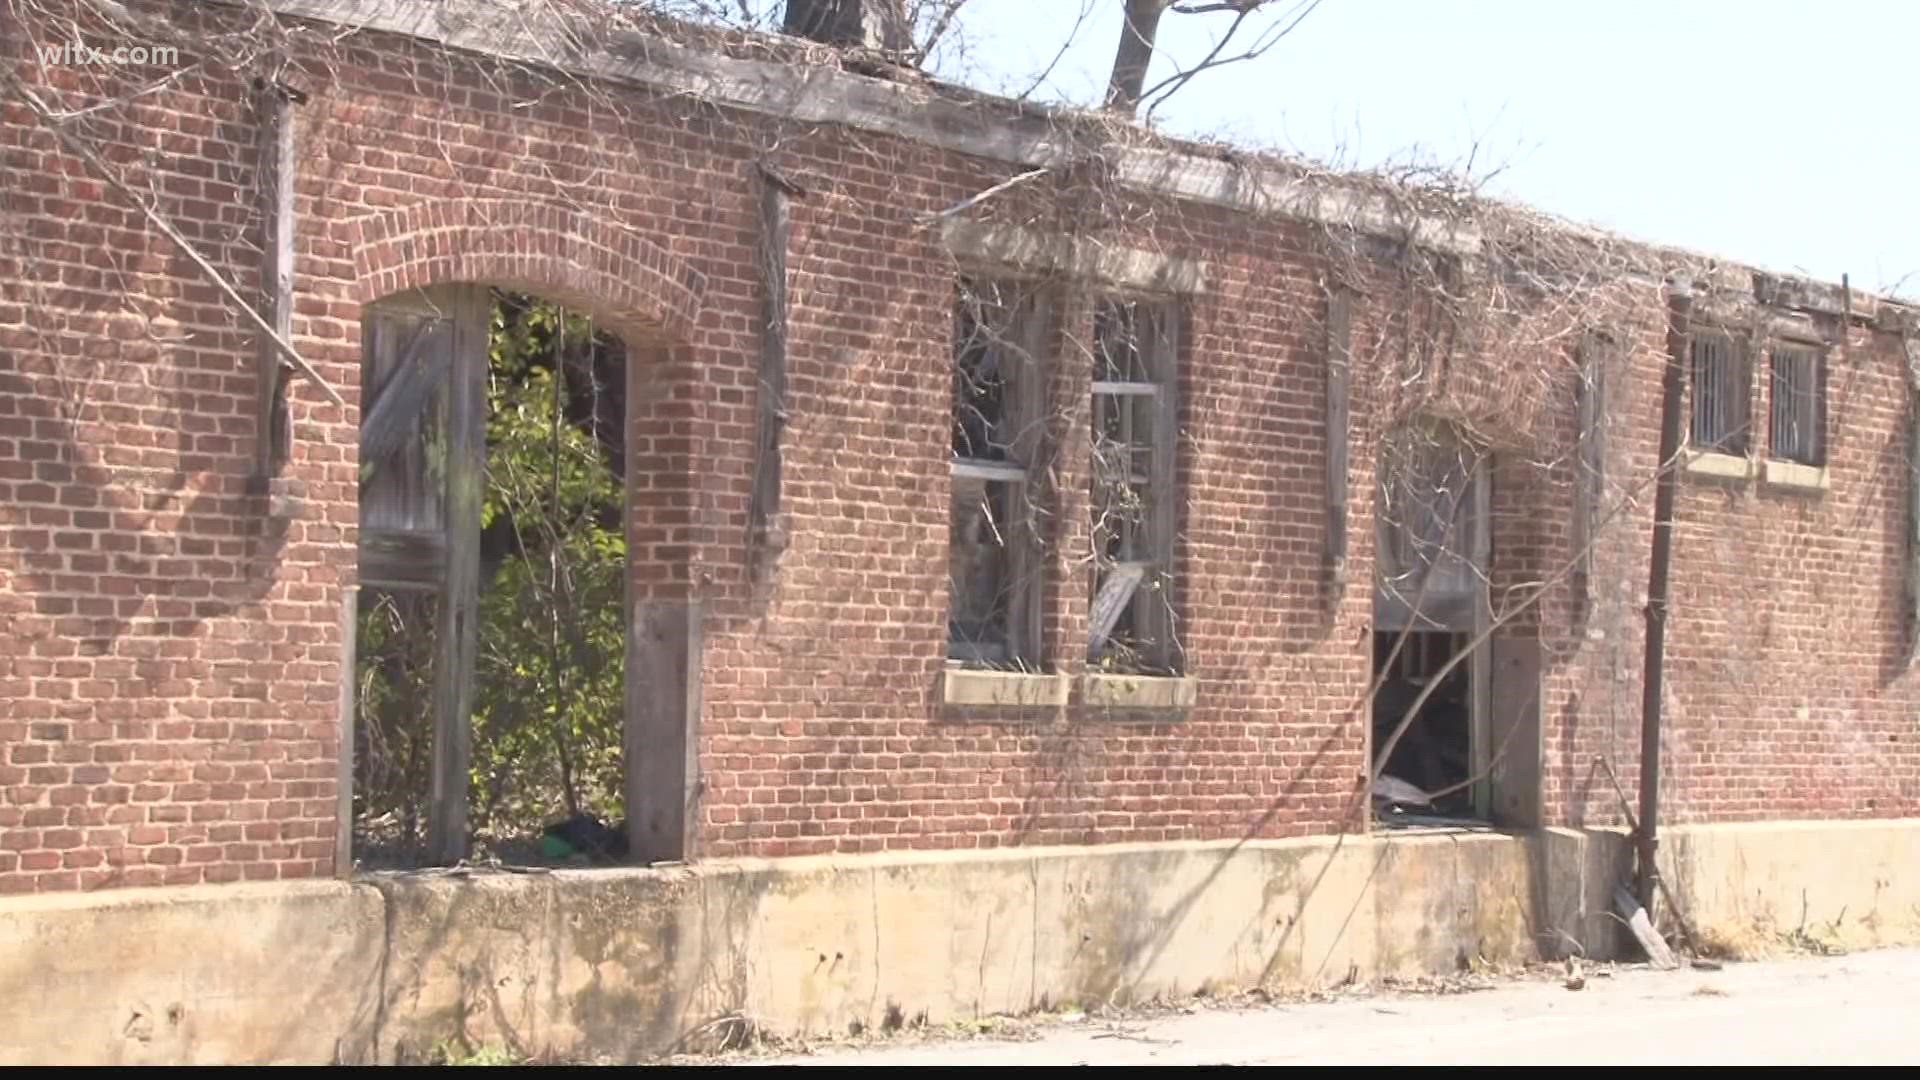 The depot, in Bishopville, was the center of the city and now it has fallen into disrepair.